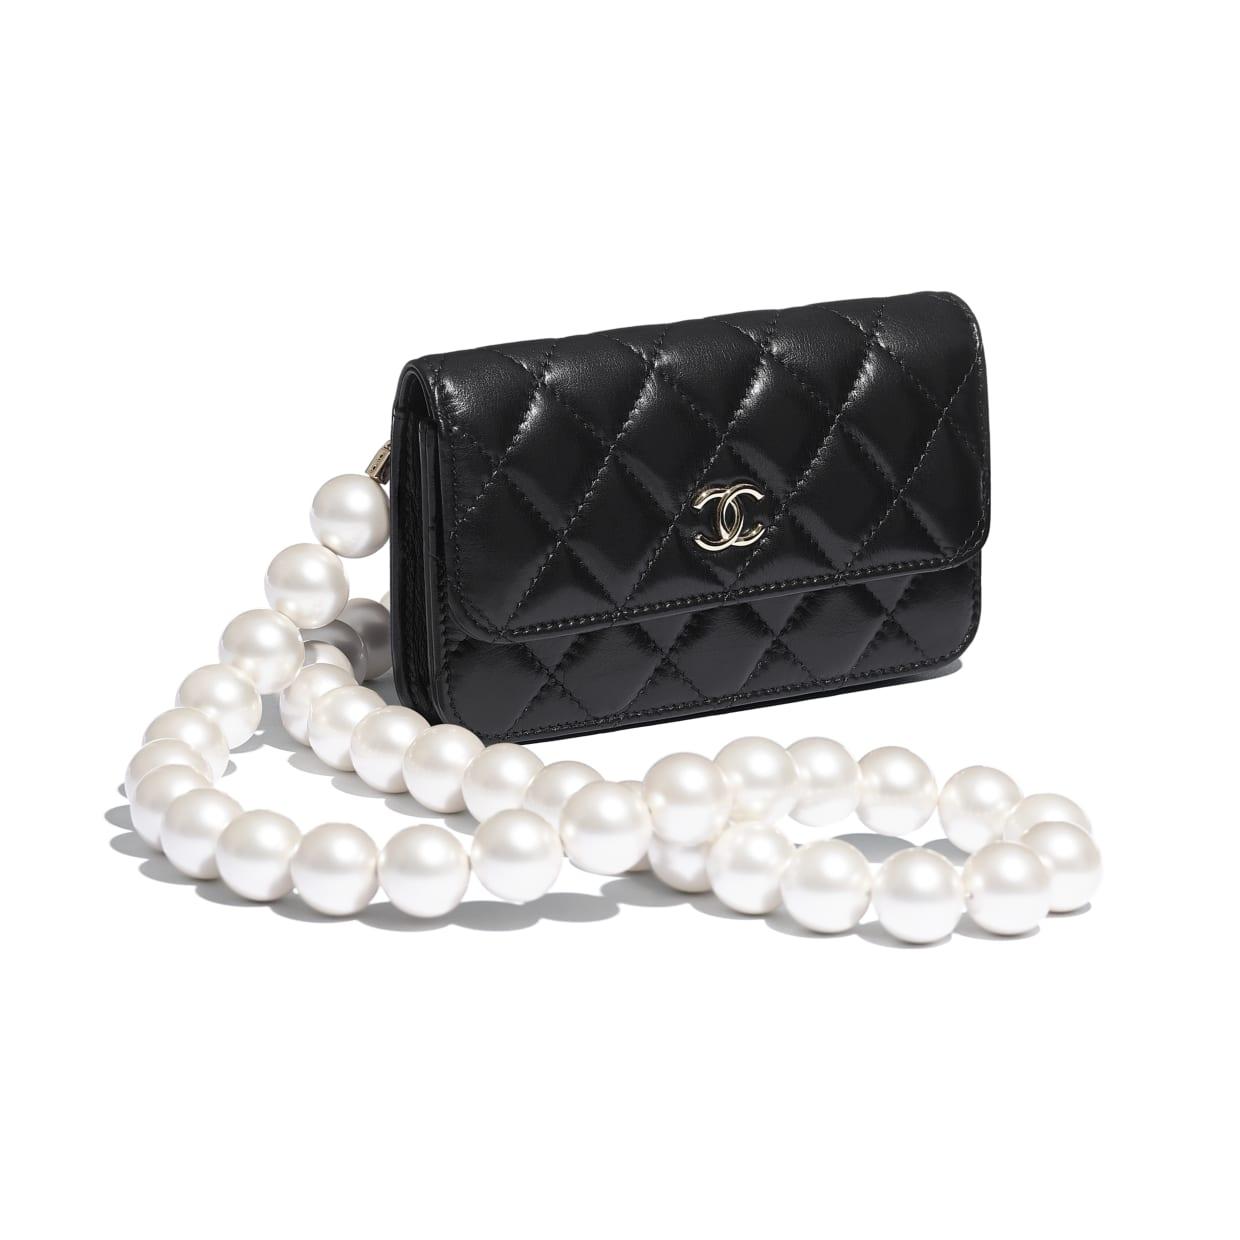 Chanel Flap Bag With Top Handle For Fall Winter 2021 Collection